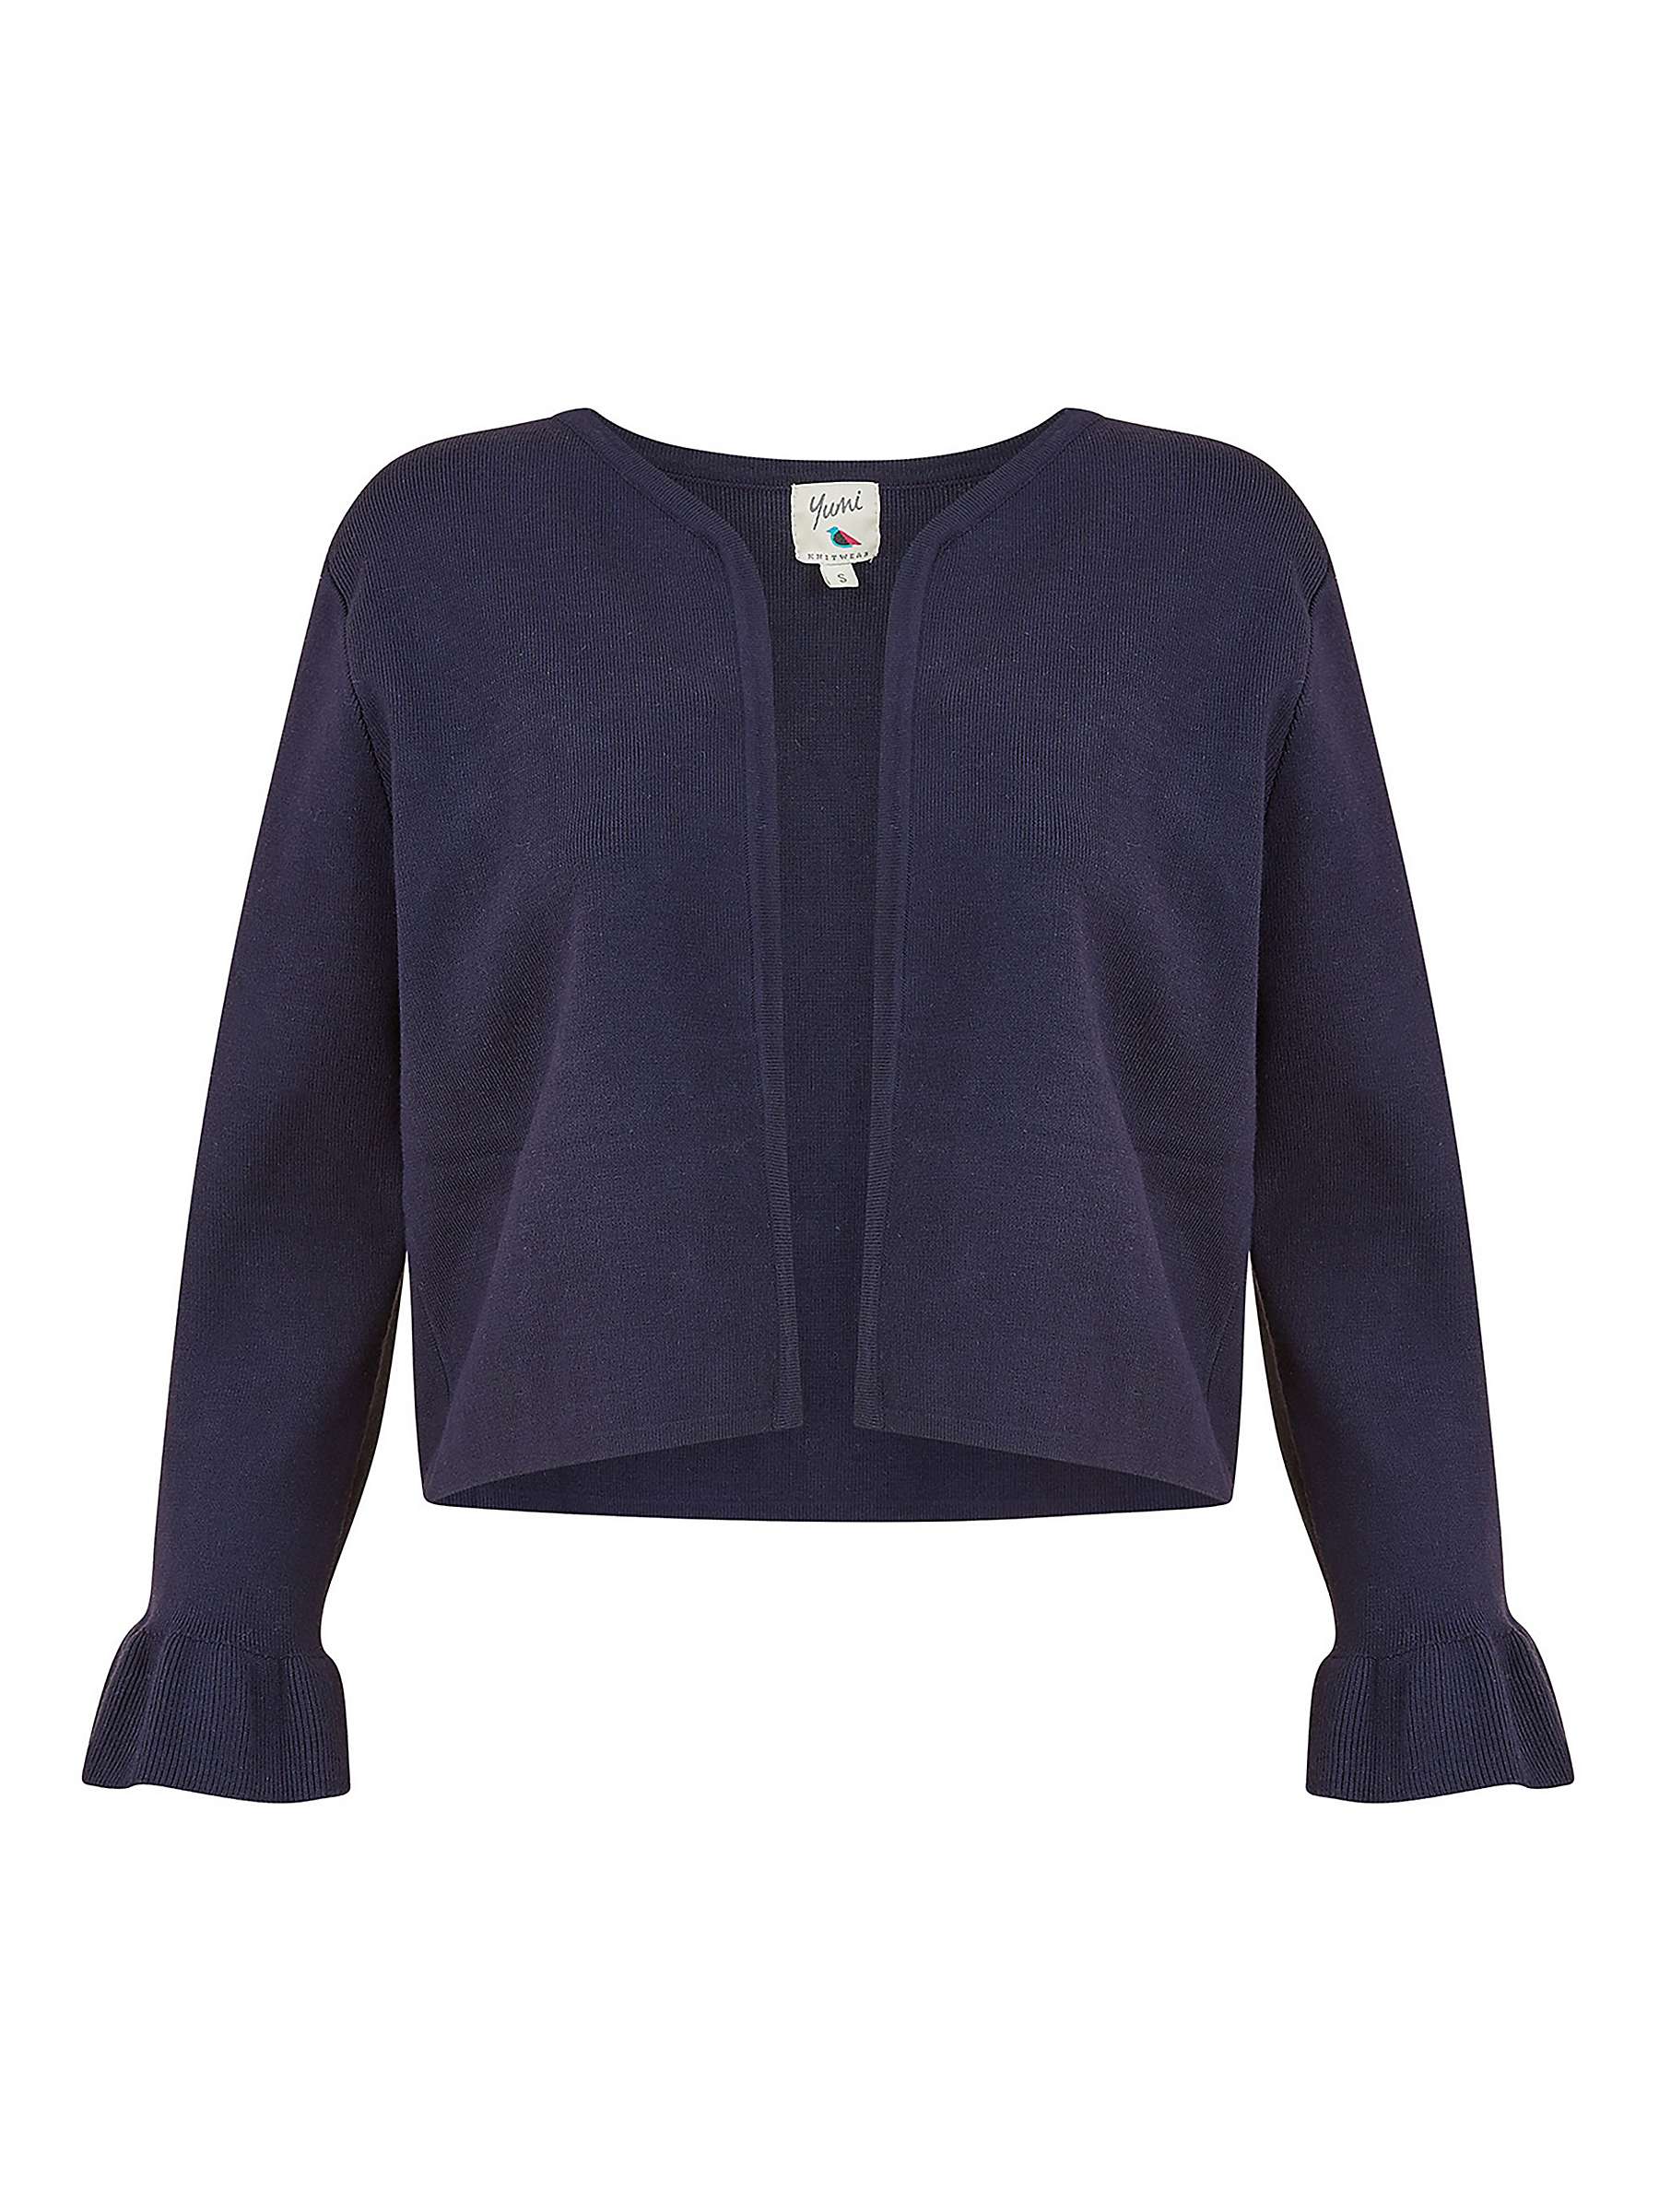 Buy Yumi Bell Sleeve Cropped Cardigan Online at johnlewis.com